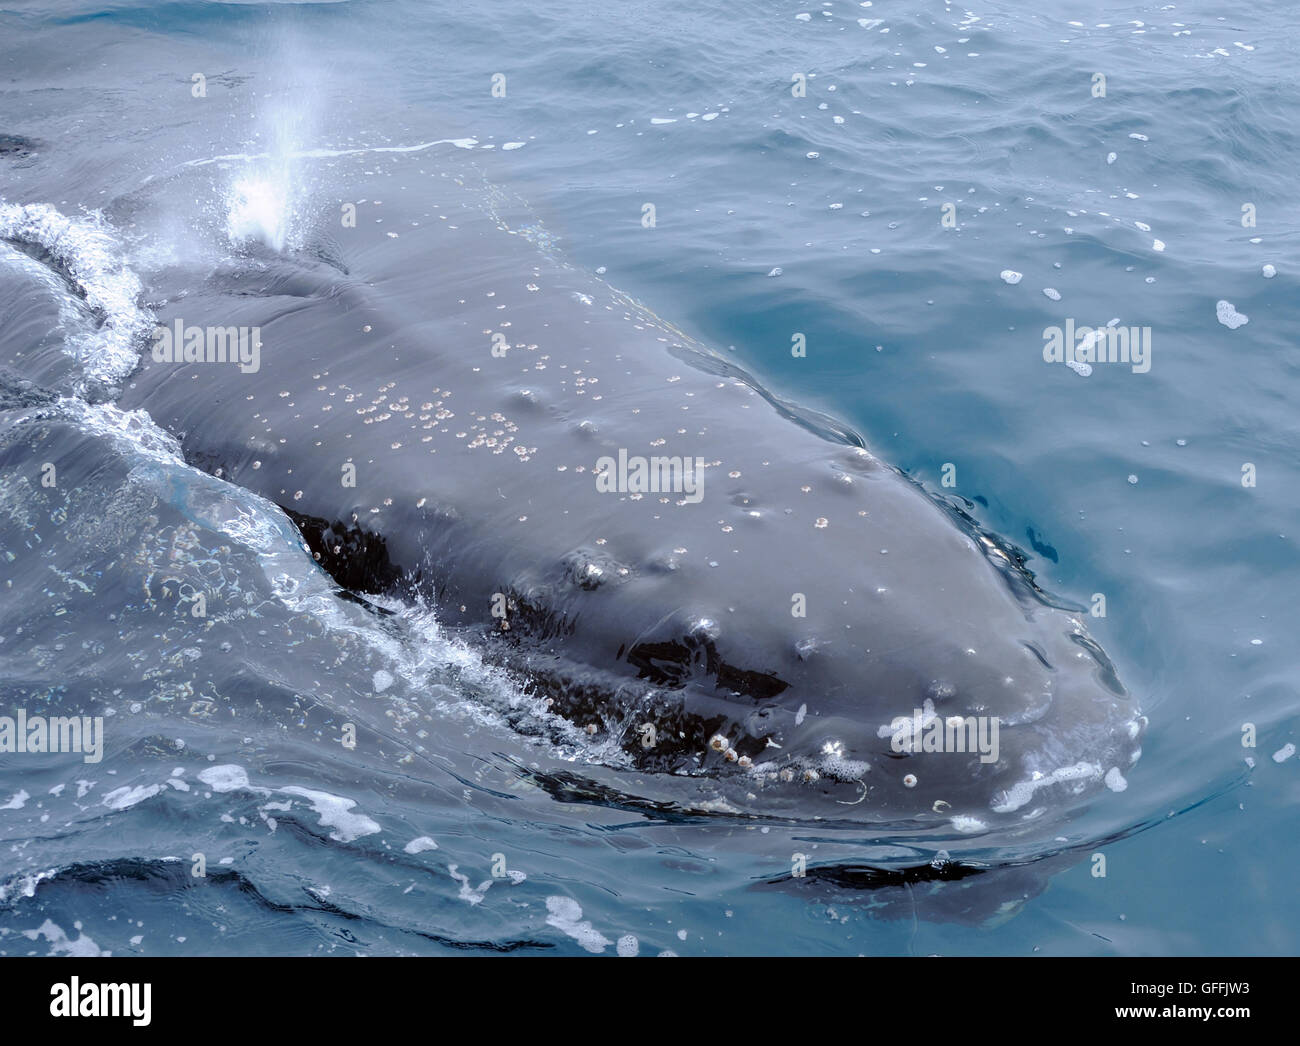 A Humpback whale blows as it surfaces (Megaptera novaeangliae) South Sandwich Islands, Southern Ocean. Stock Photo